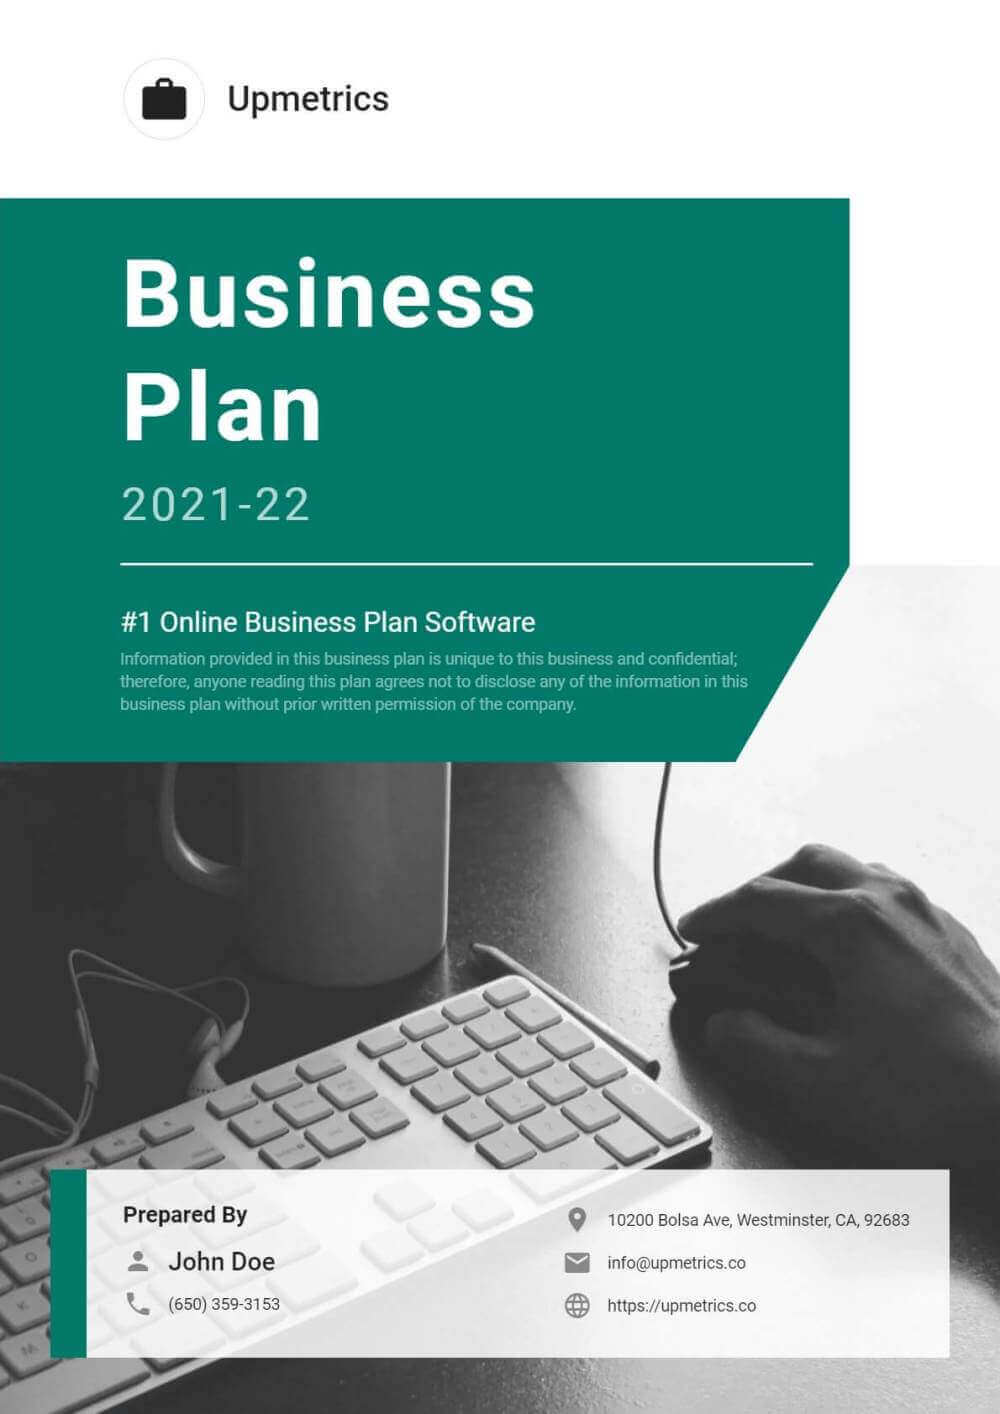 how to make a cover page for a business plan